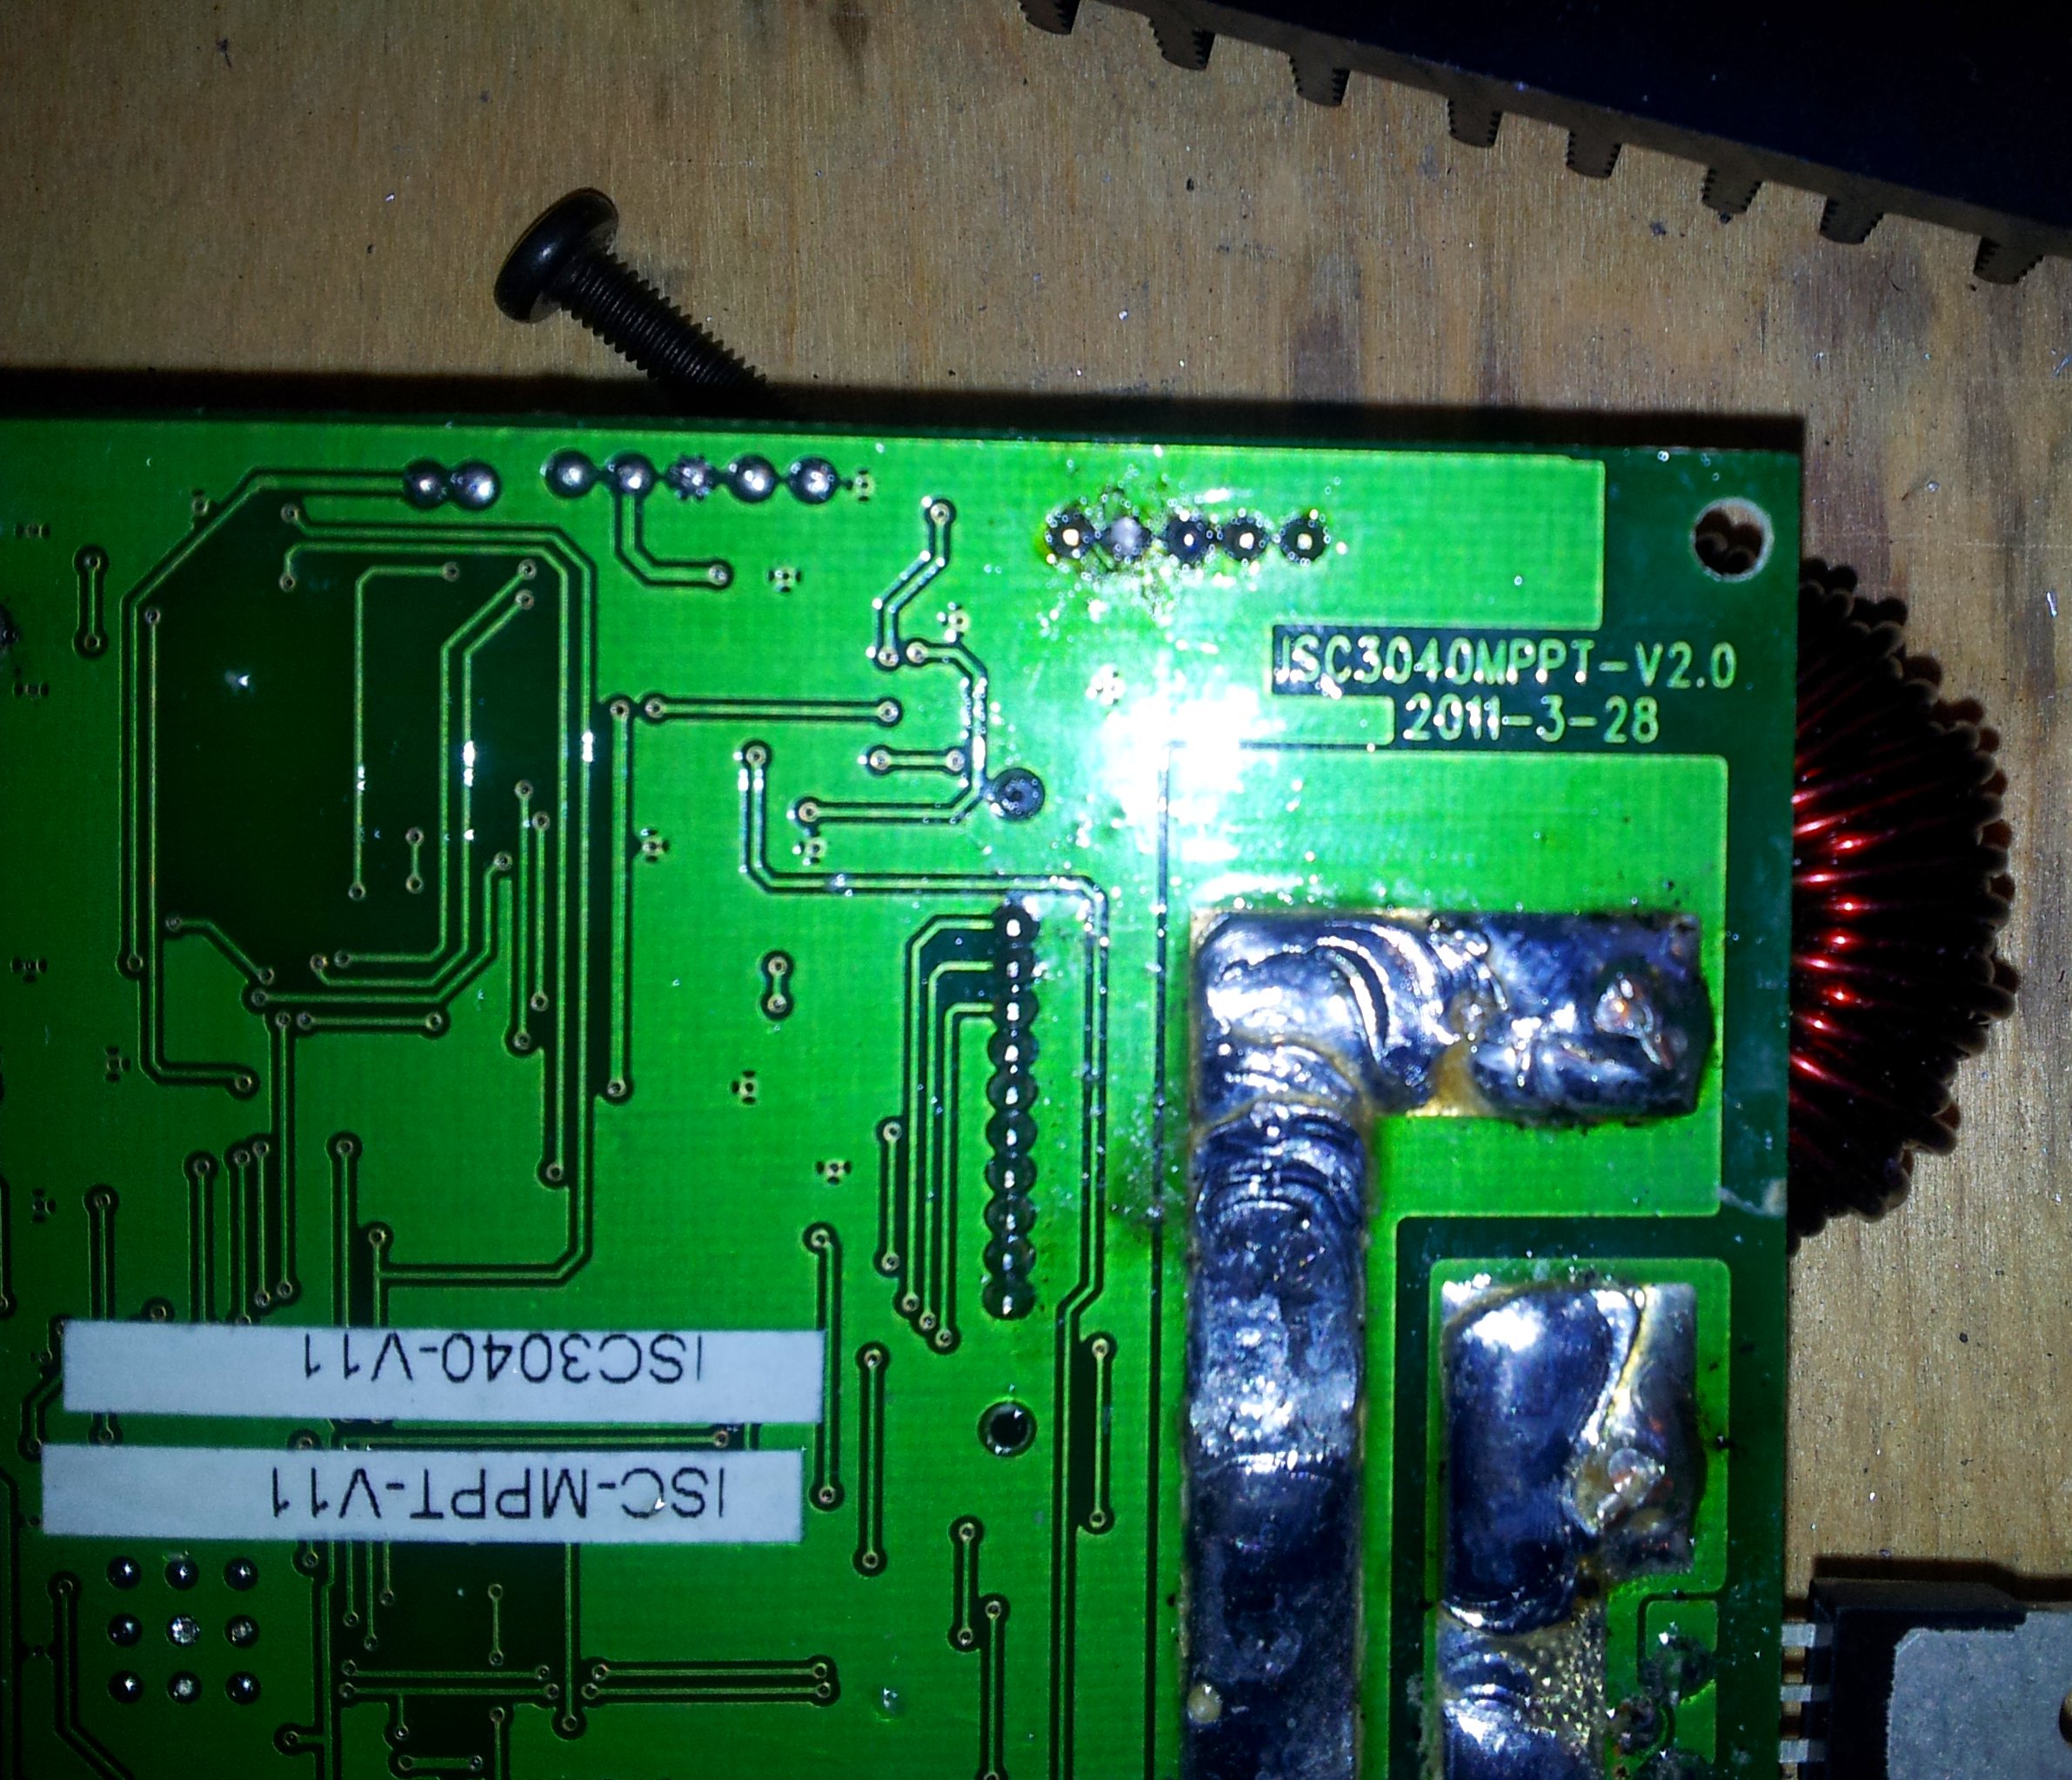 Board ID on the back of the PCB